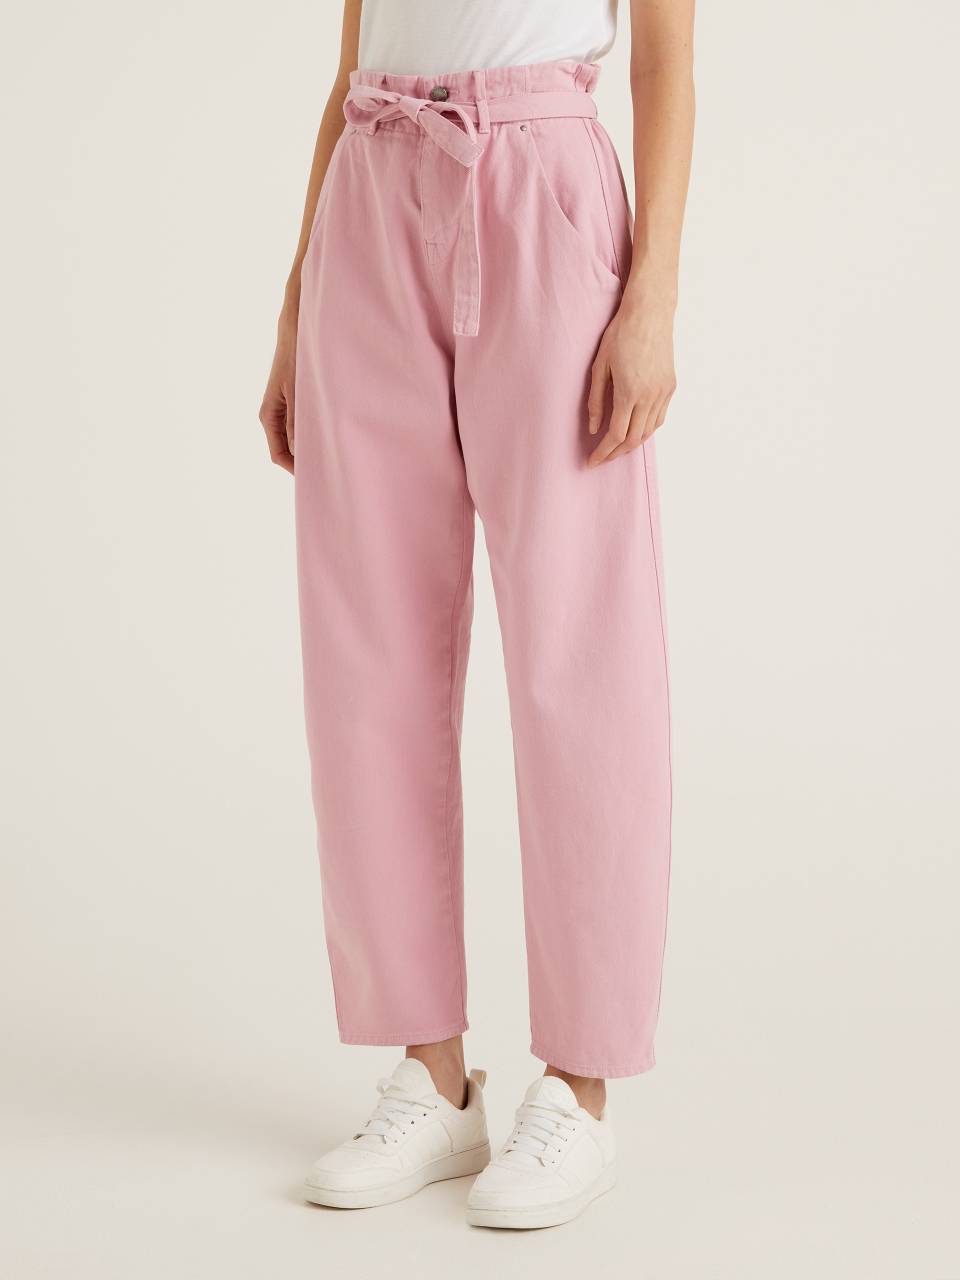 Benetton Paperbag trousers in 100% cotton. 1